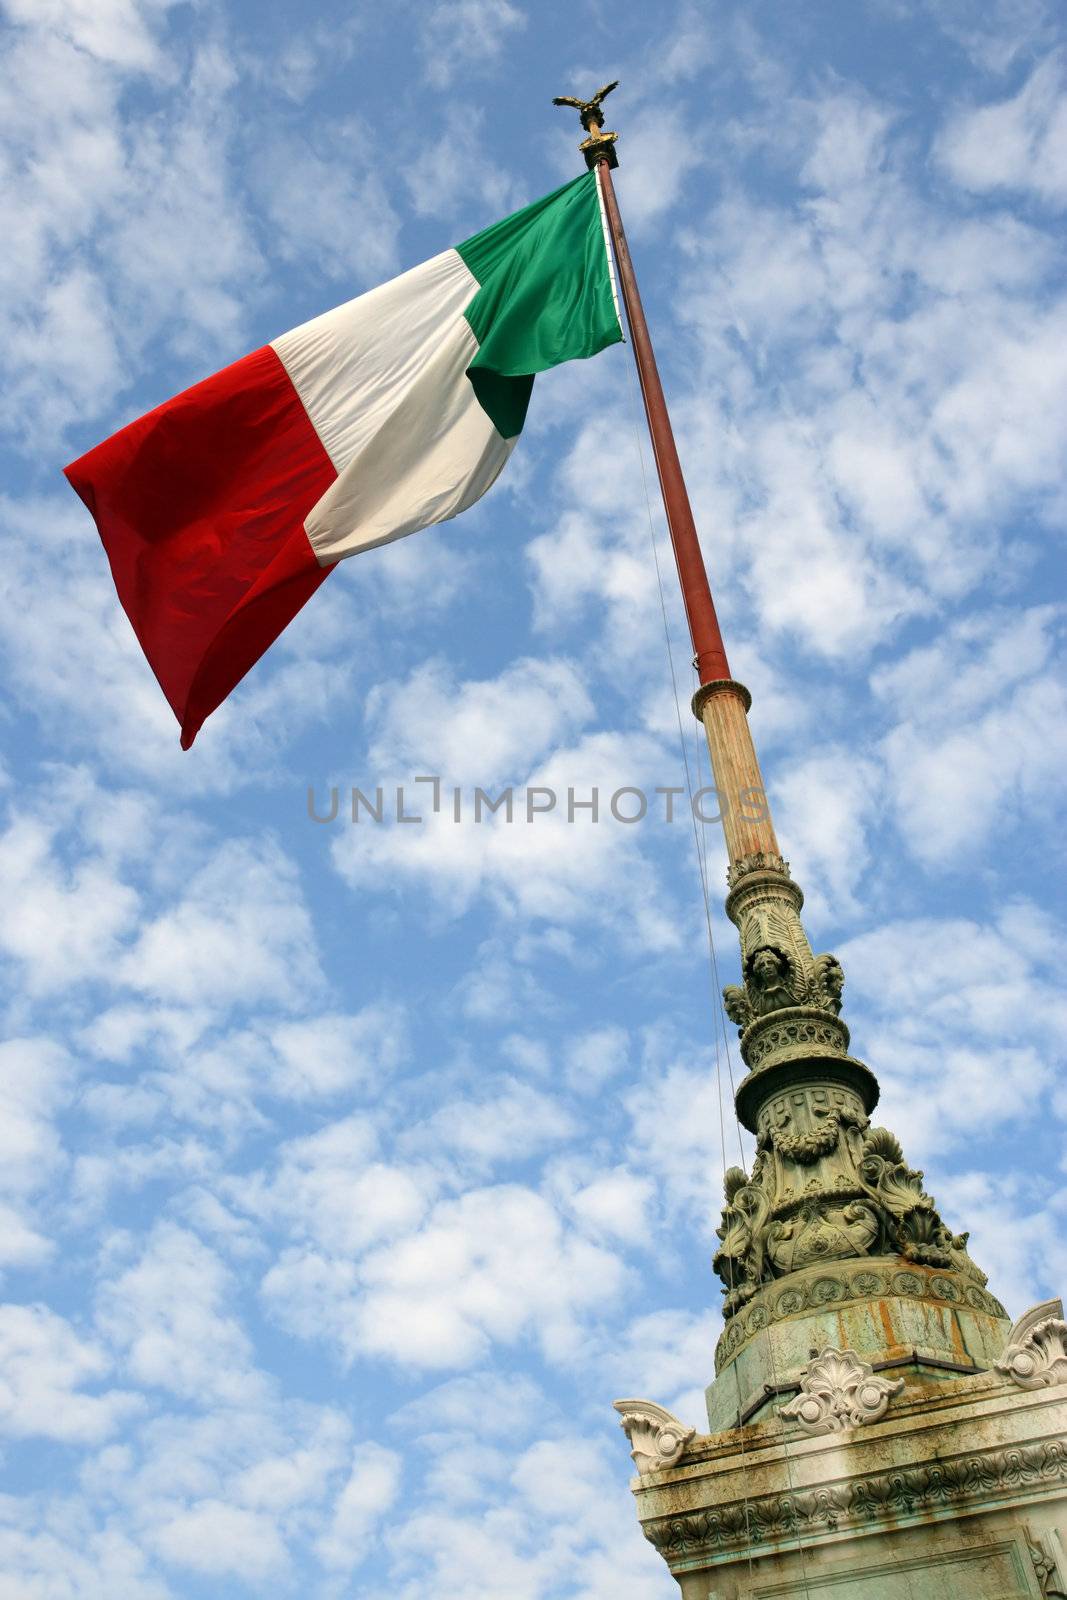 The flag of Italy blowing in the wind.
